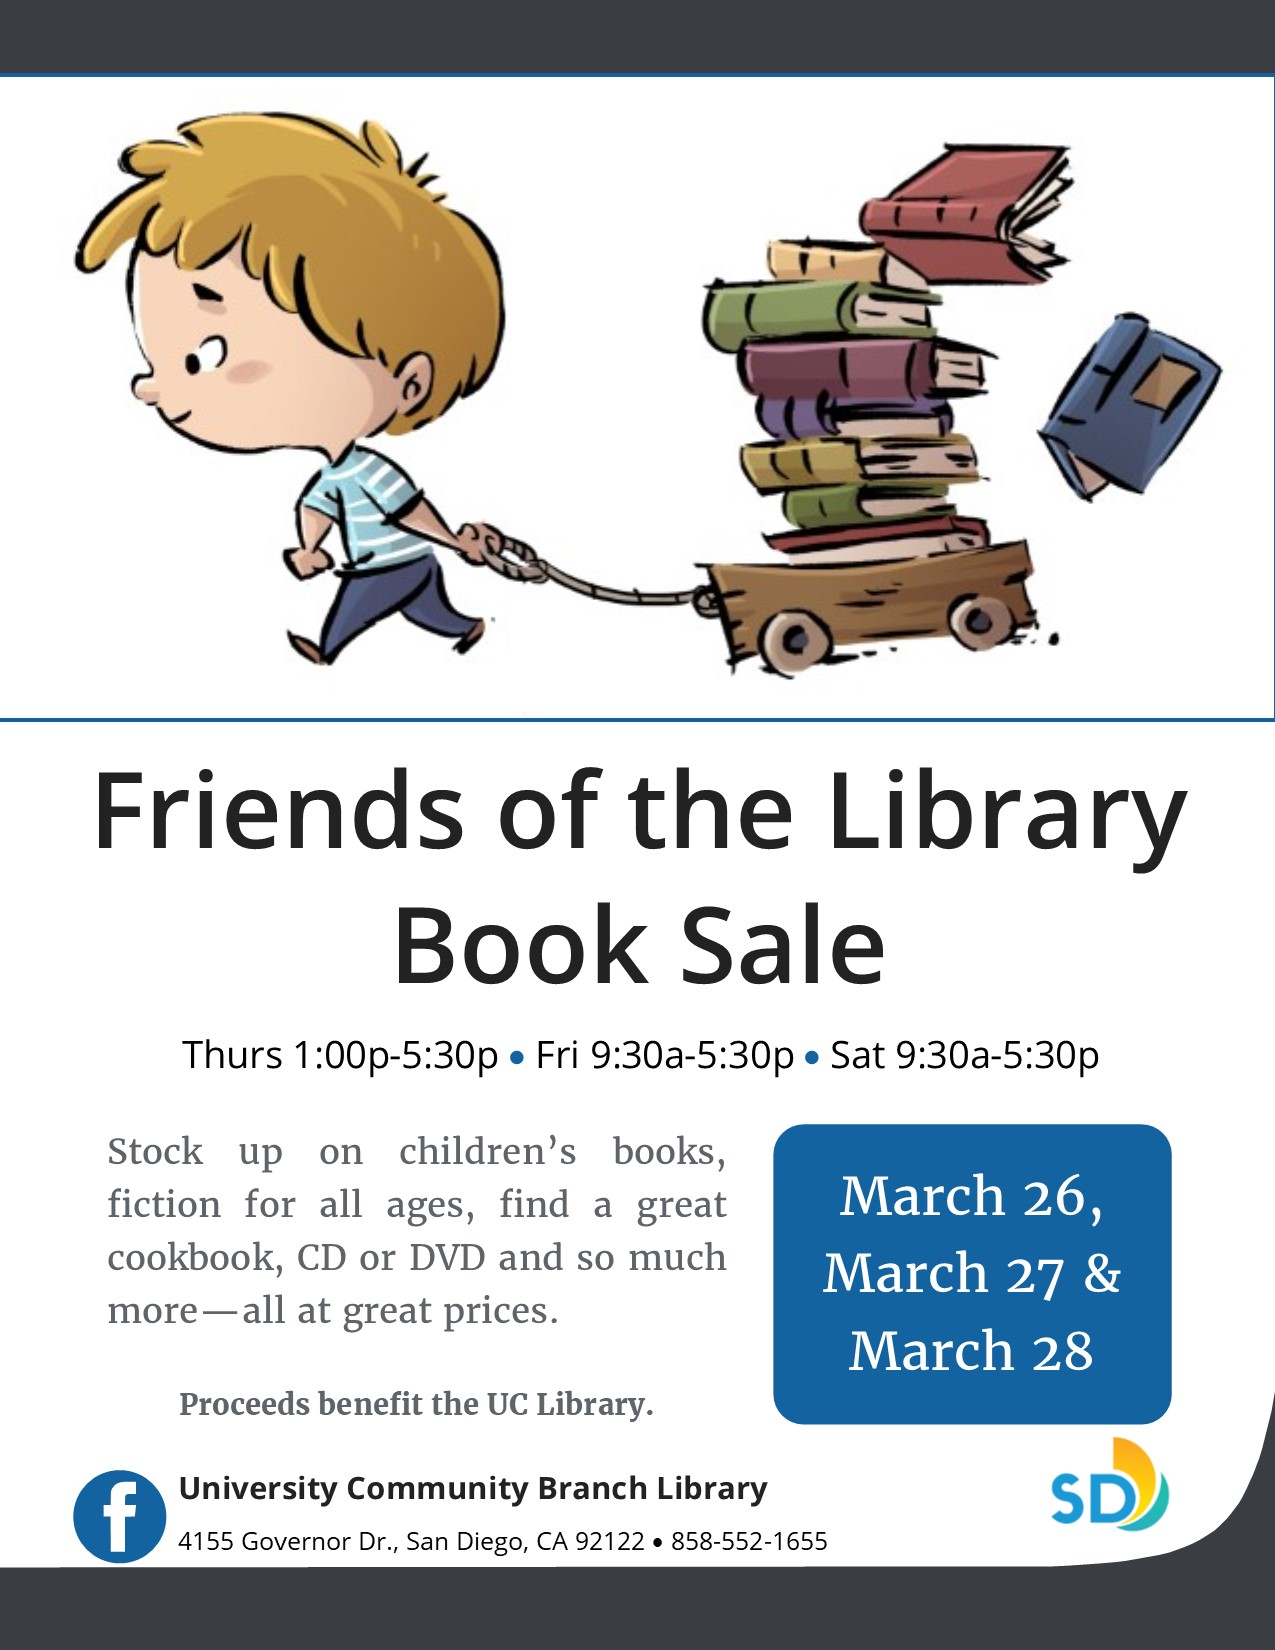 Friends of the Library Book Sale poster